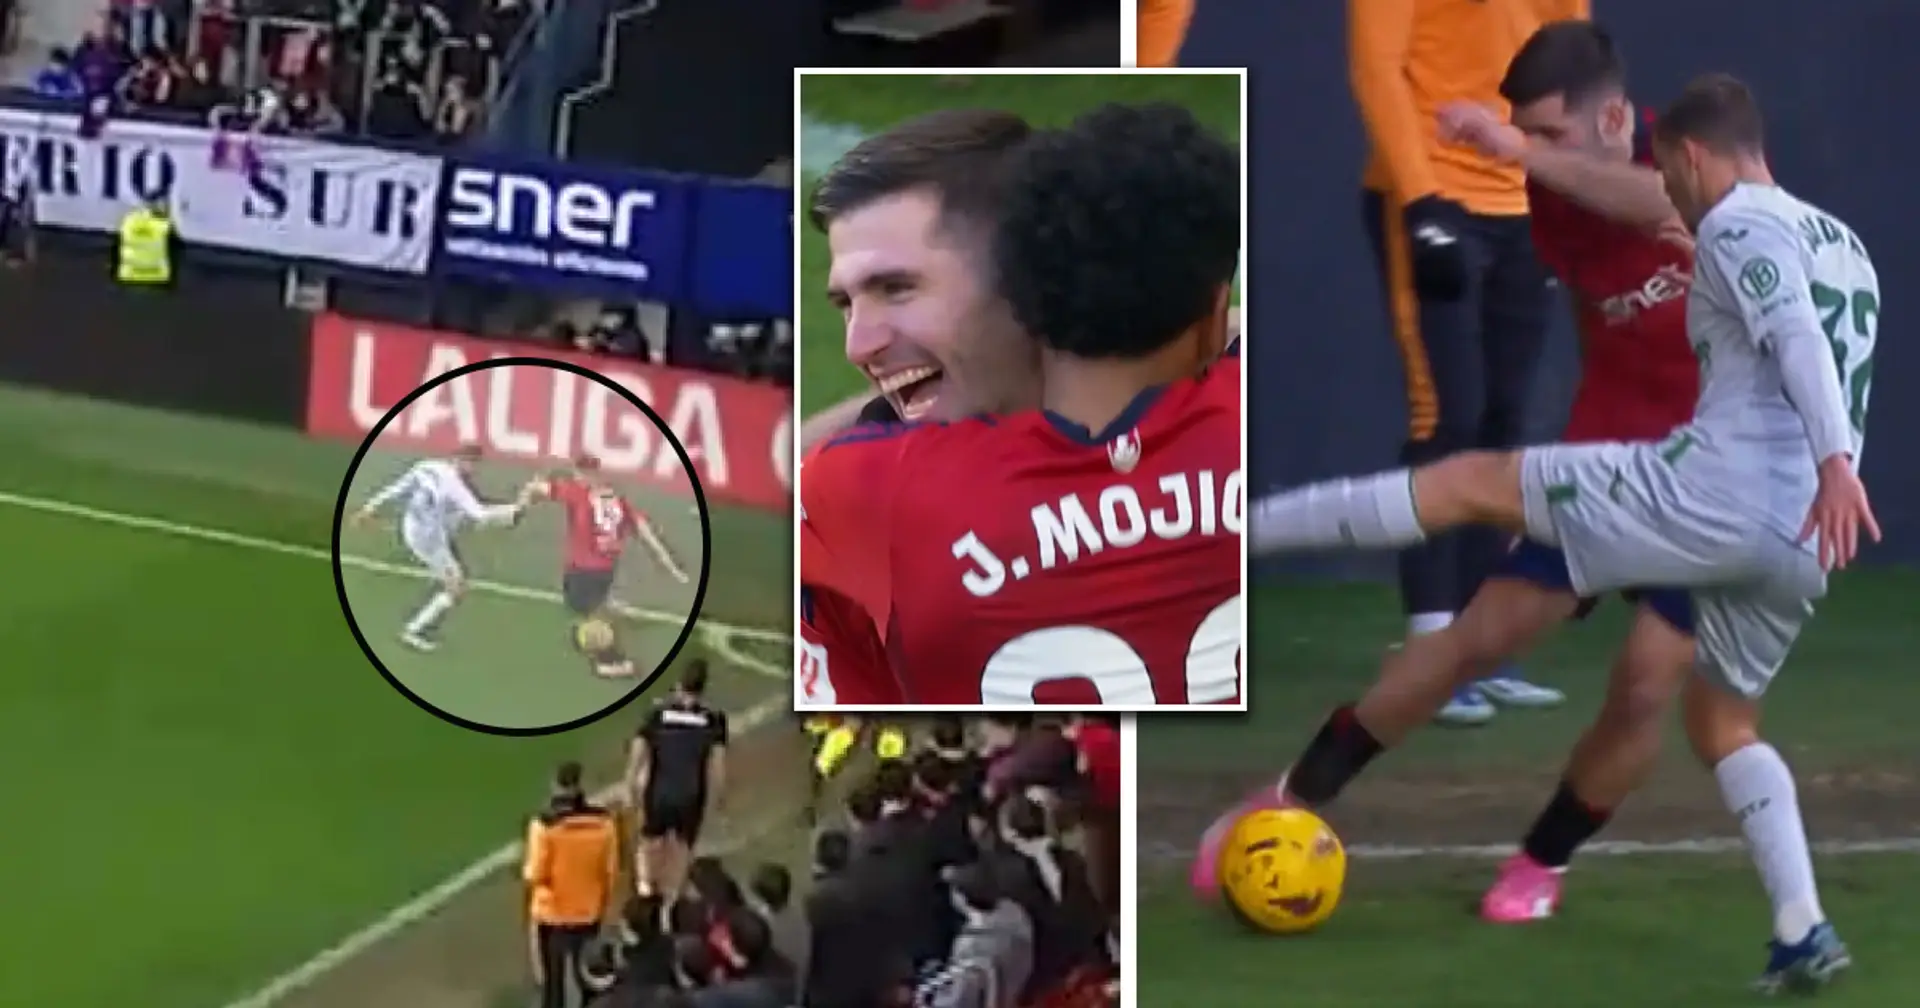 LaLiga player scores unbelievable goal from impossible angle to beat Mason Greenwood and Getafe  